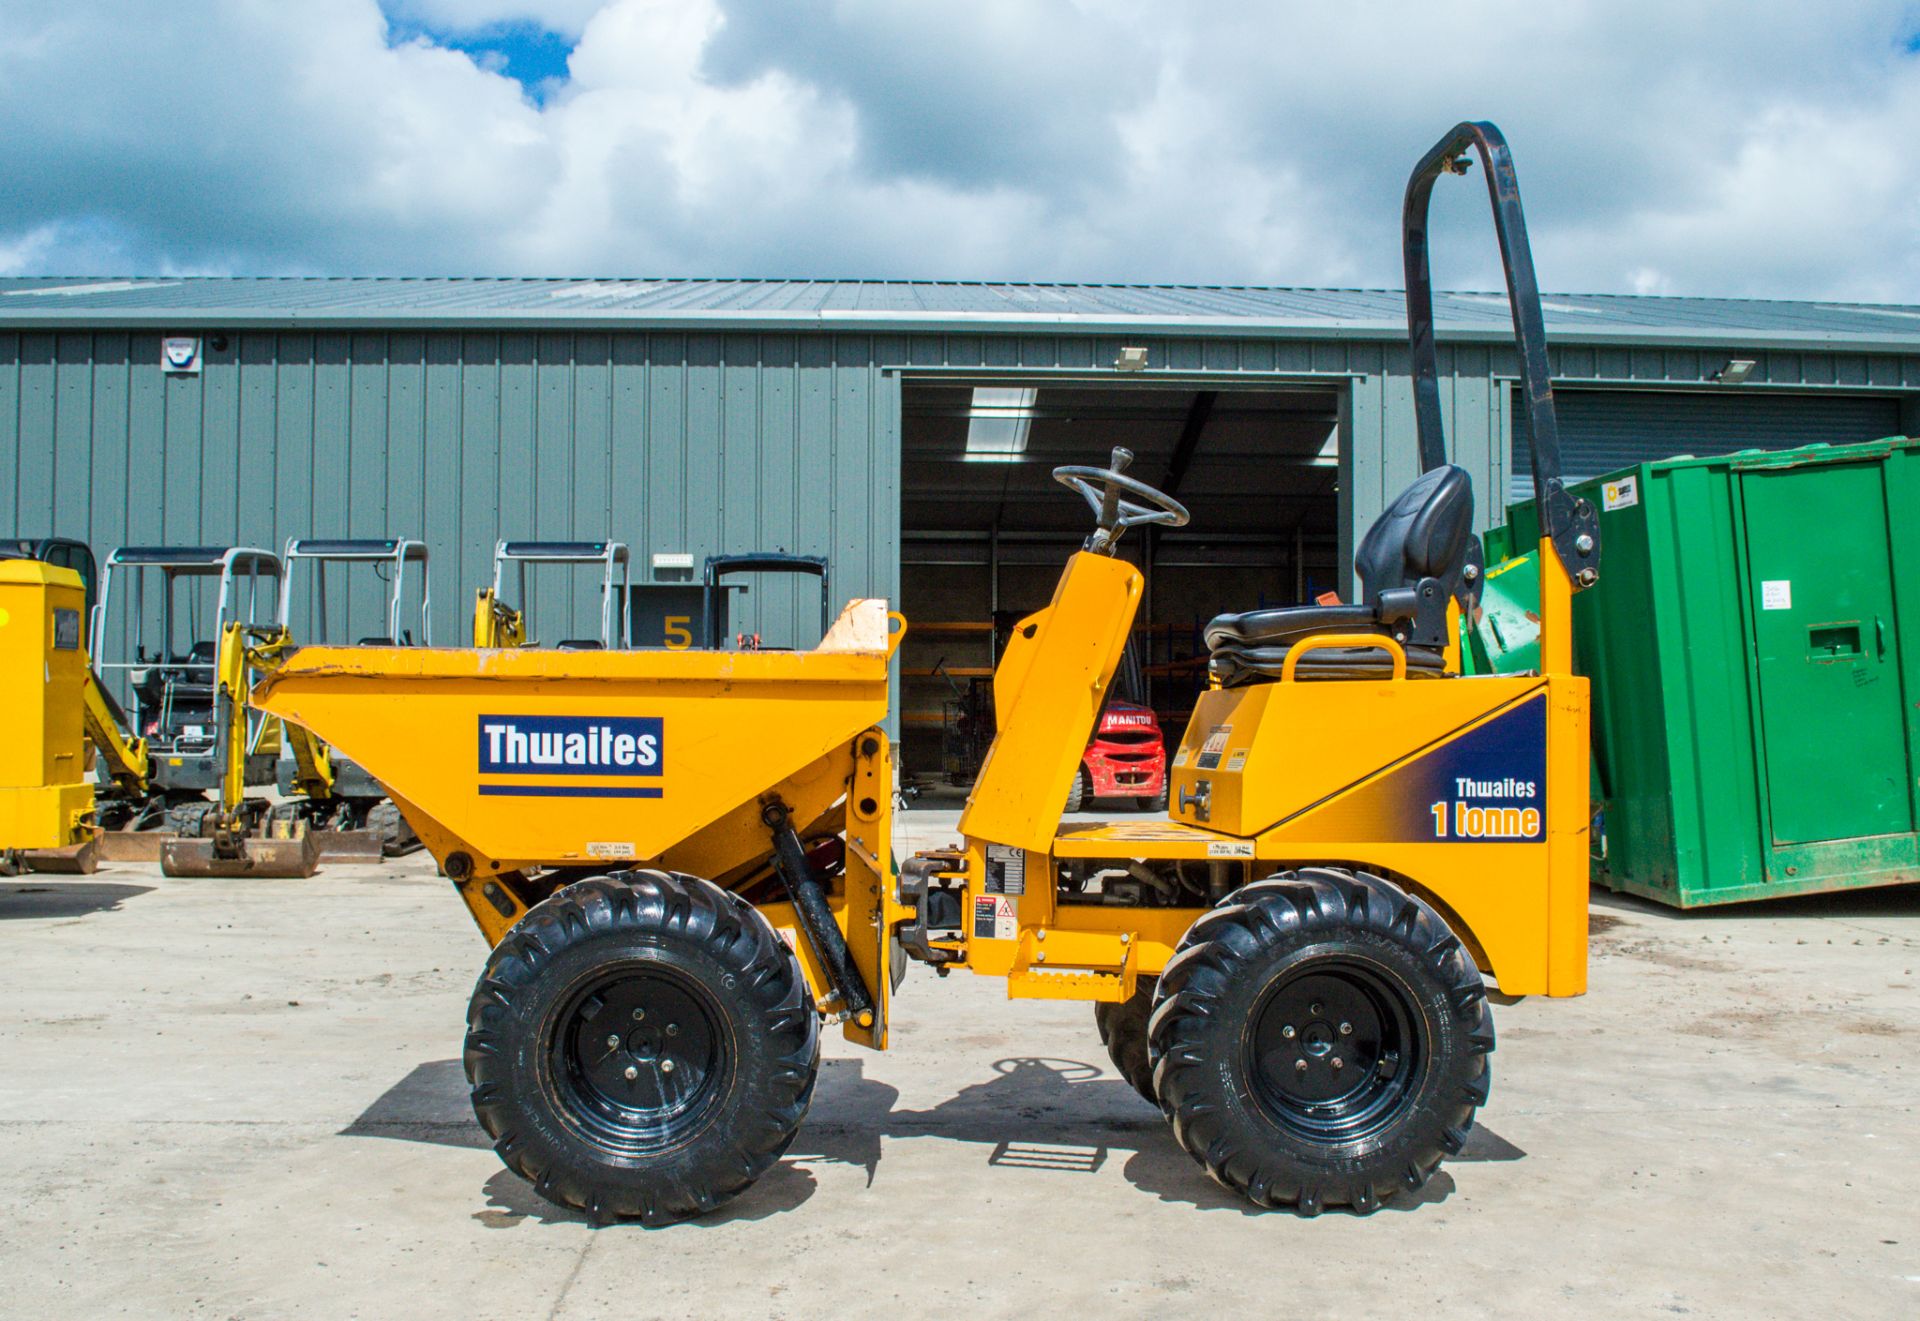 Thwaites 1 tonne high tip dumper Year: 2018 S/N: E3649 Recorded hours: 441 XL187003 - Image 7 of 21